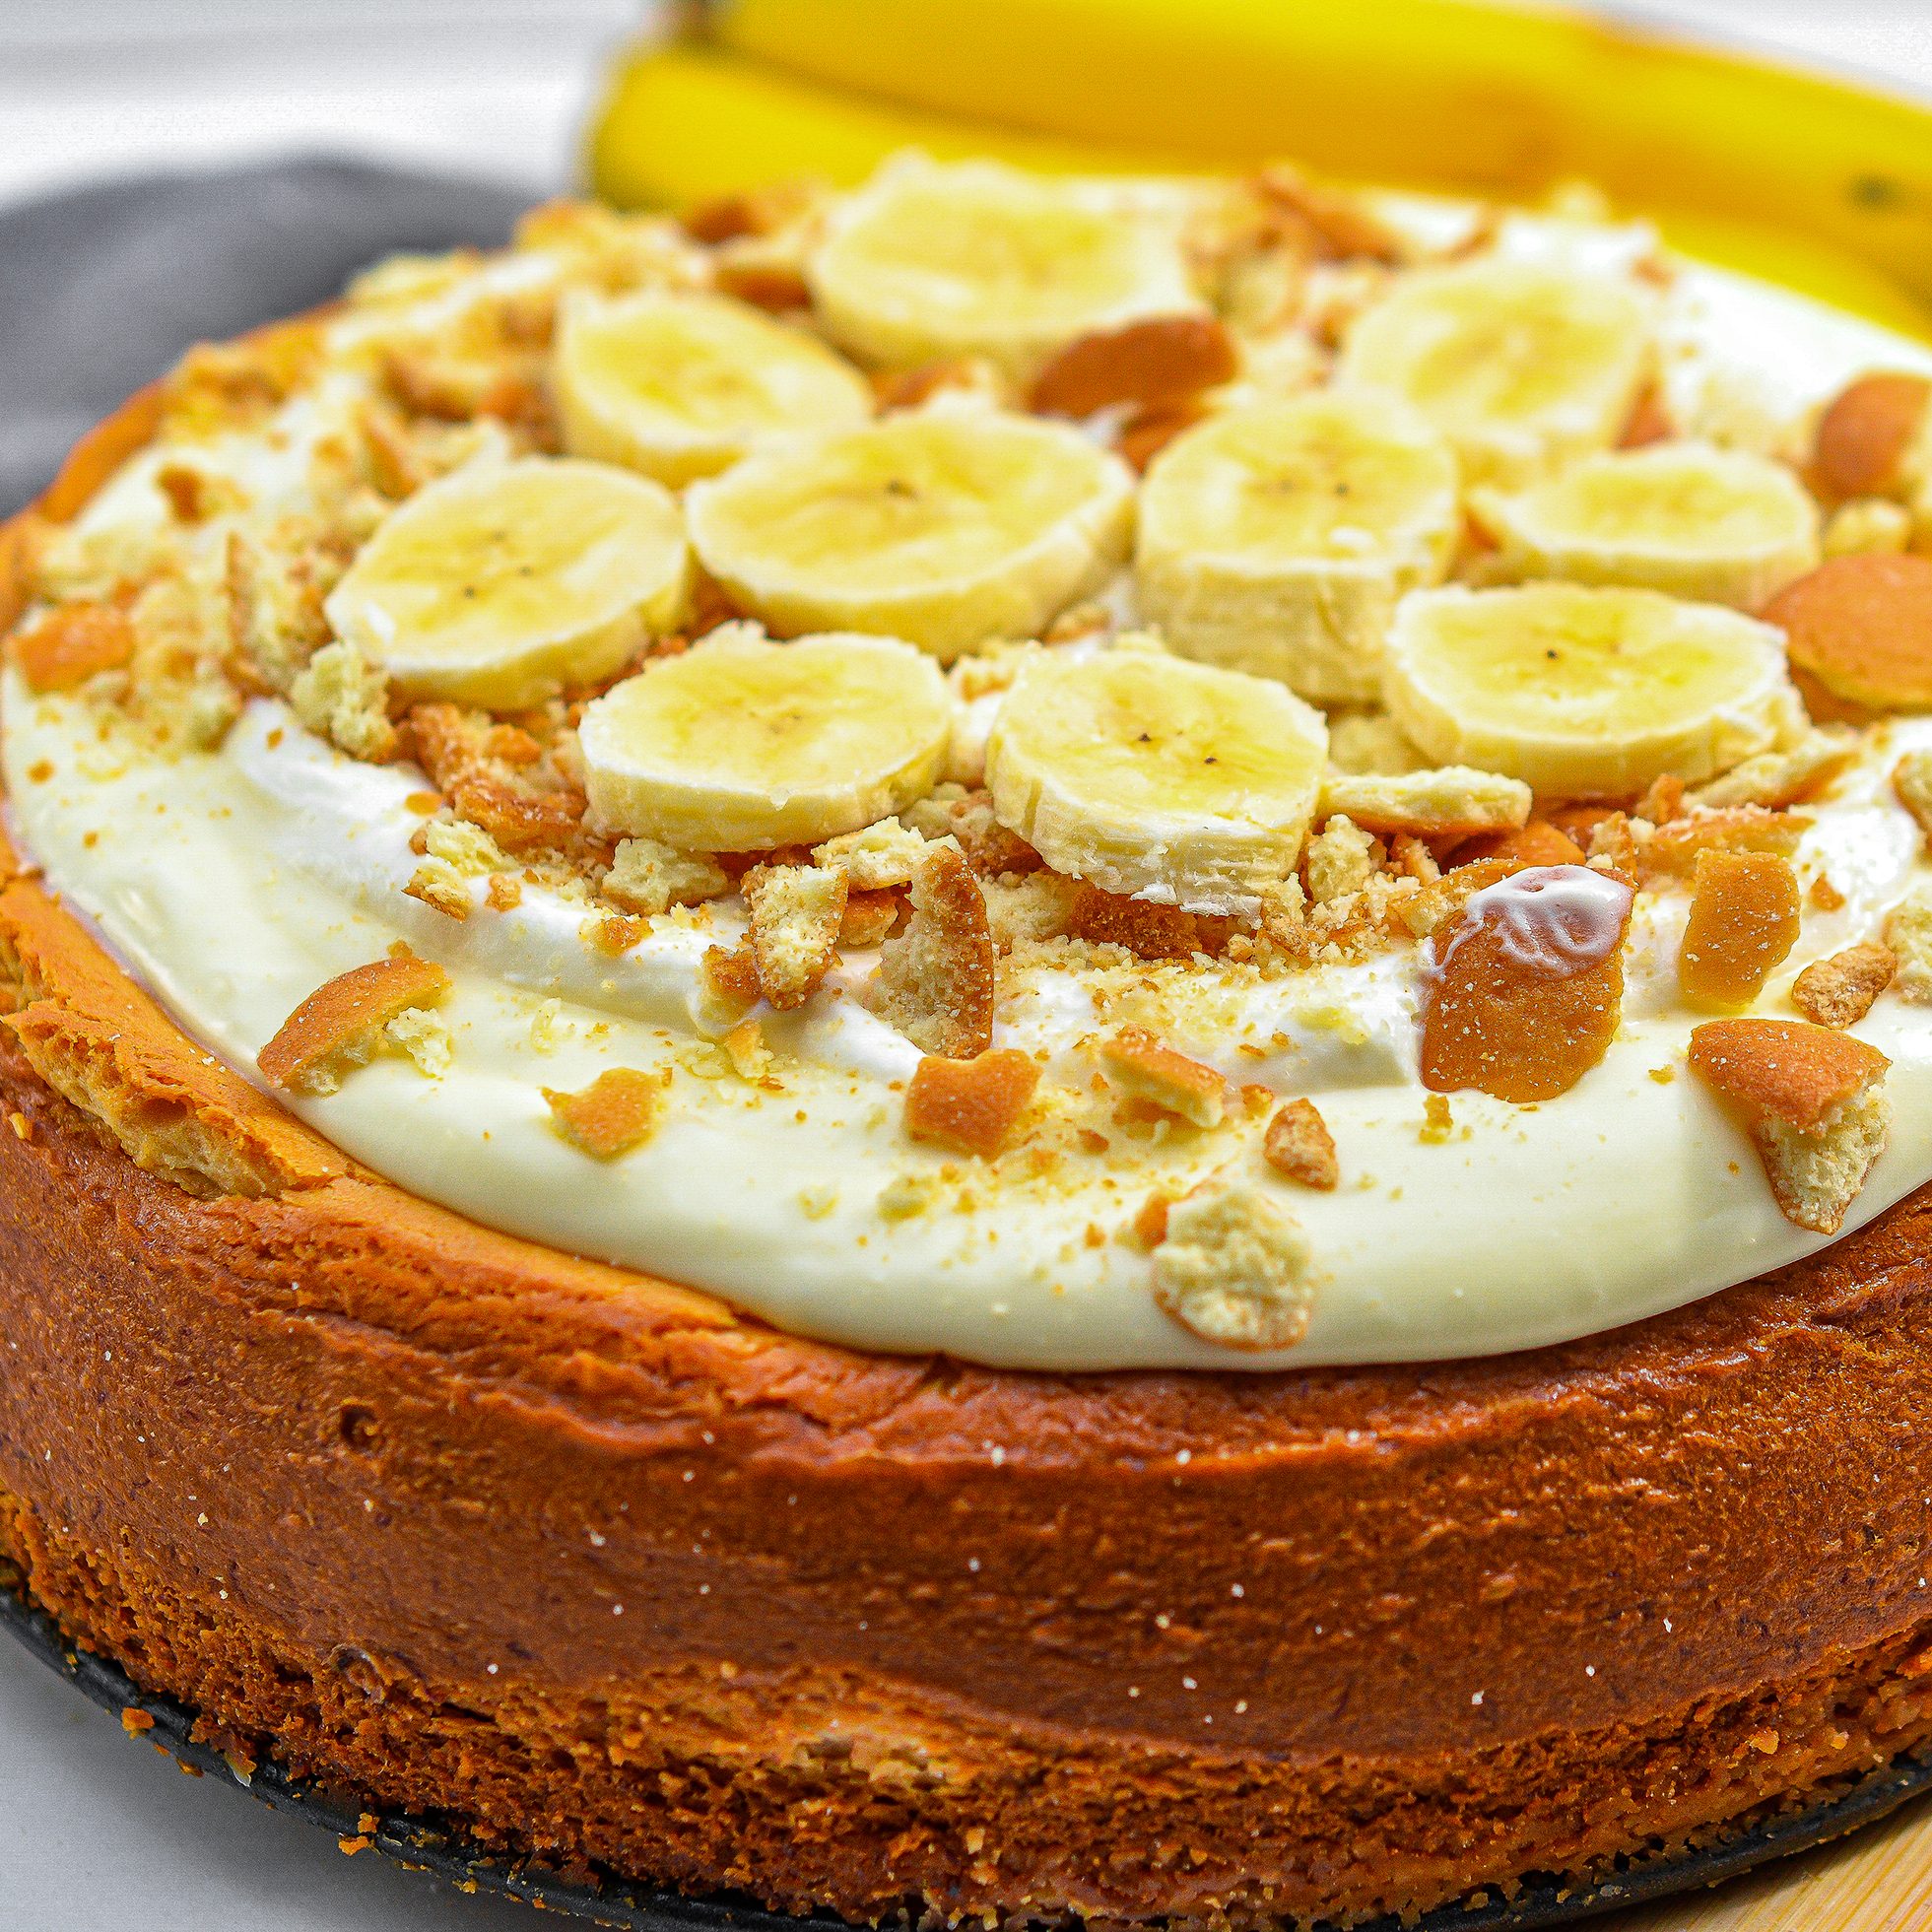 Spread the whipped cream on top of the cheesecake and garnish with crushed vanilla wafers and freshly sliced bananas before serving.